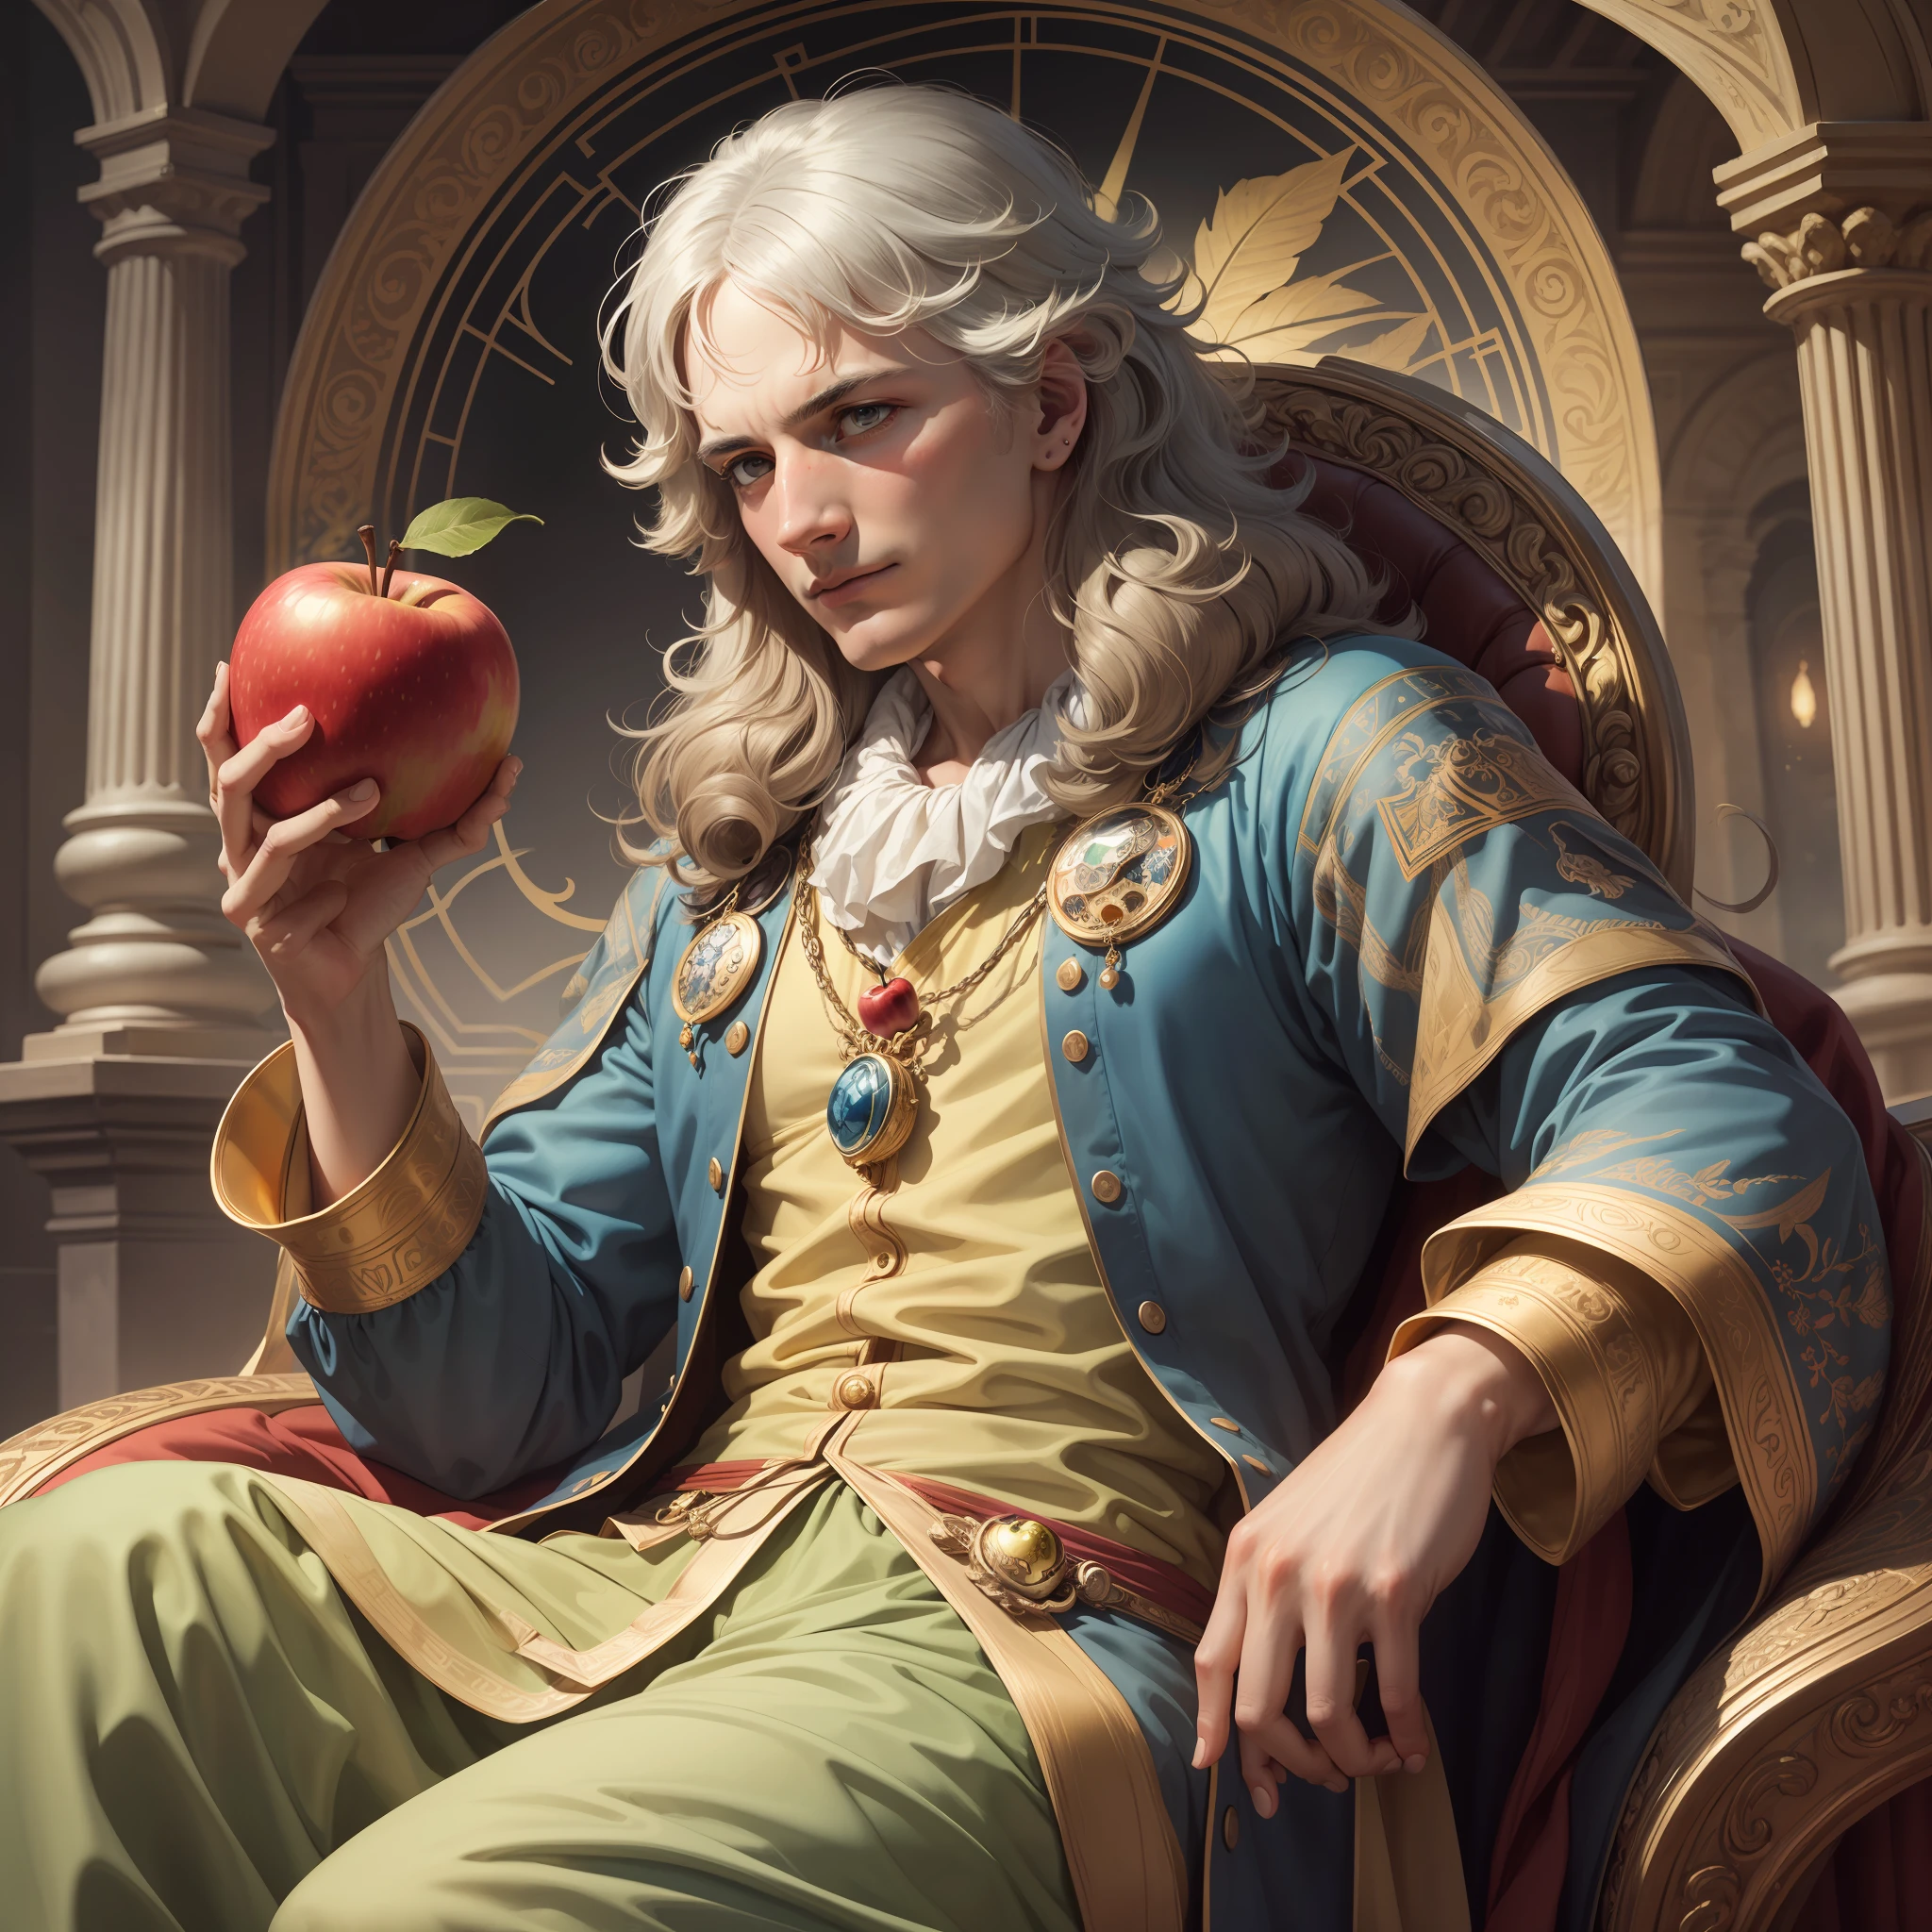 "An ultra-detailed and beautiful illustration of Isaac Newton holding an apple like a majestic king, sitting on his throne with impeccable gradation of colors."